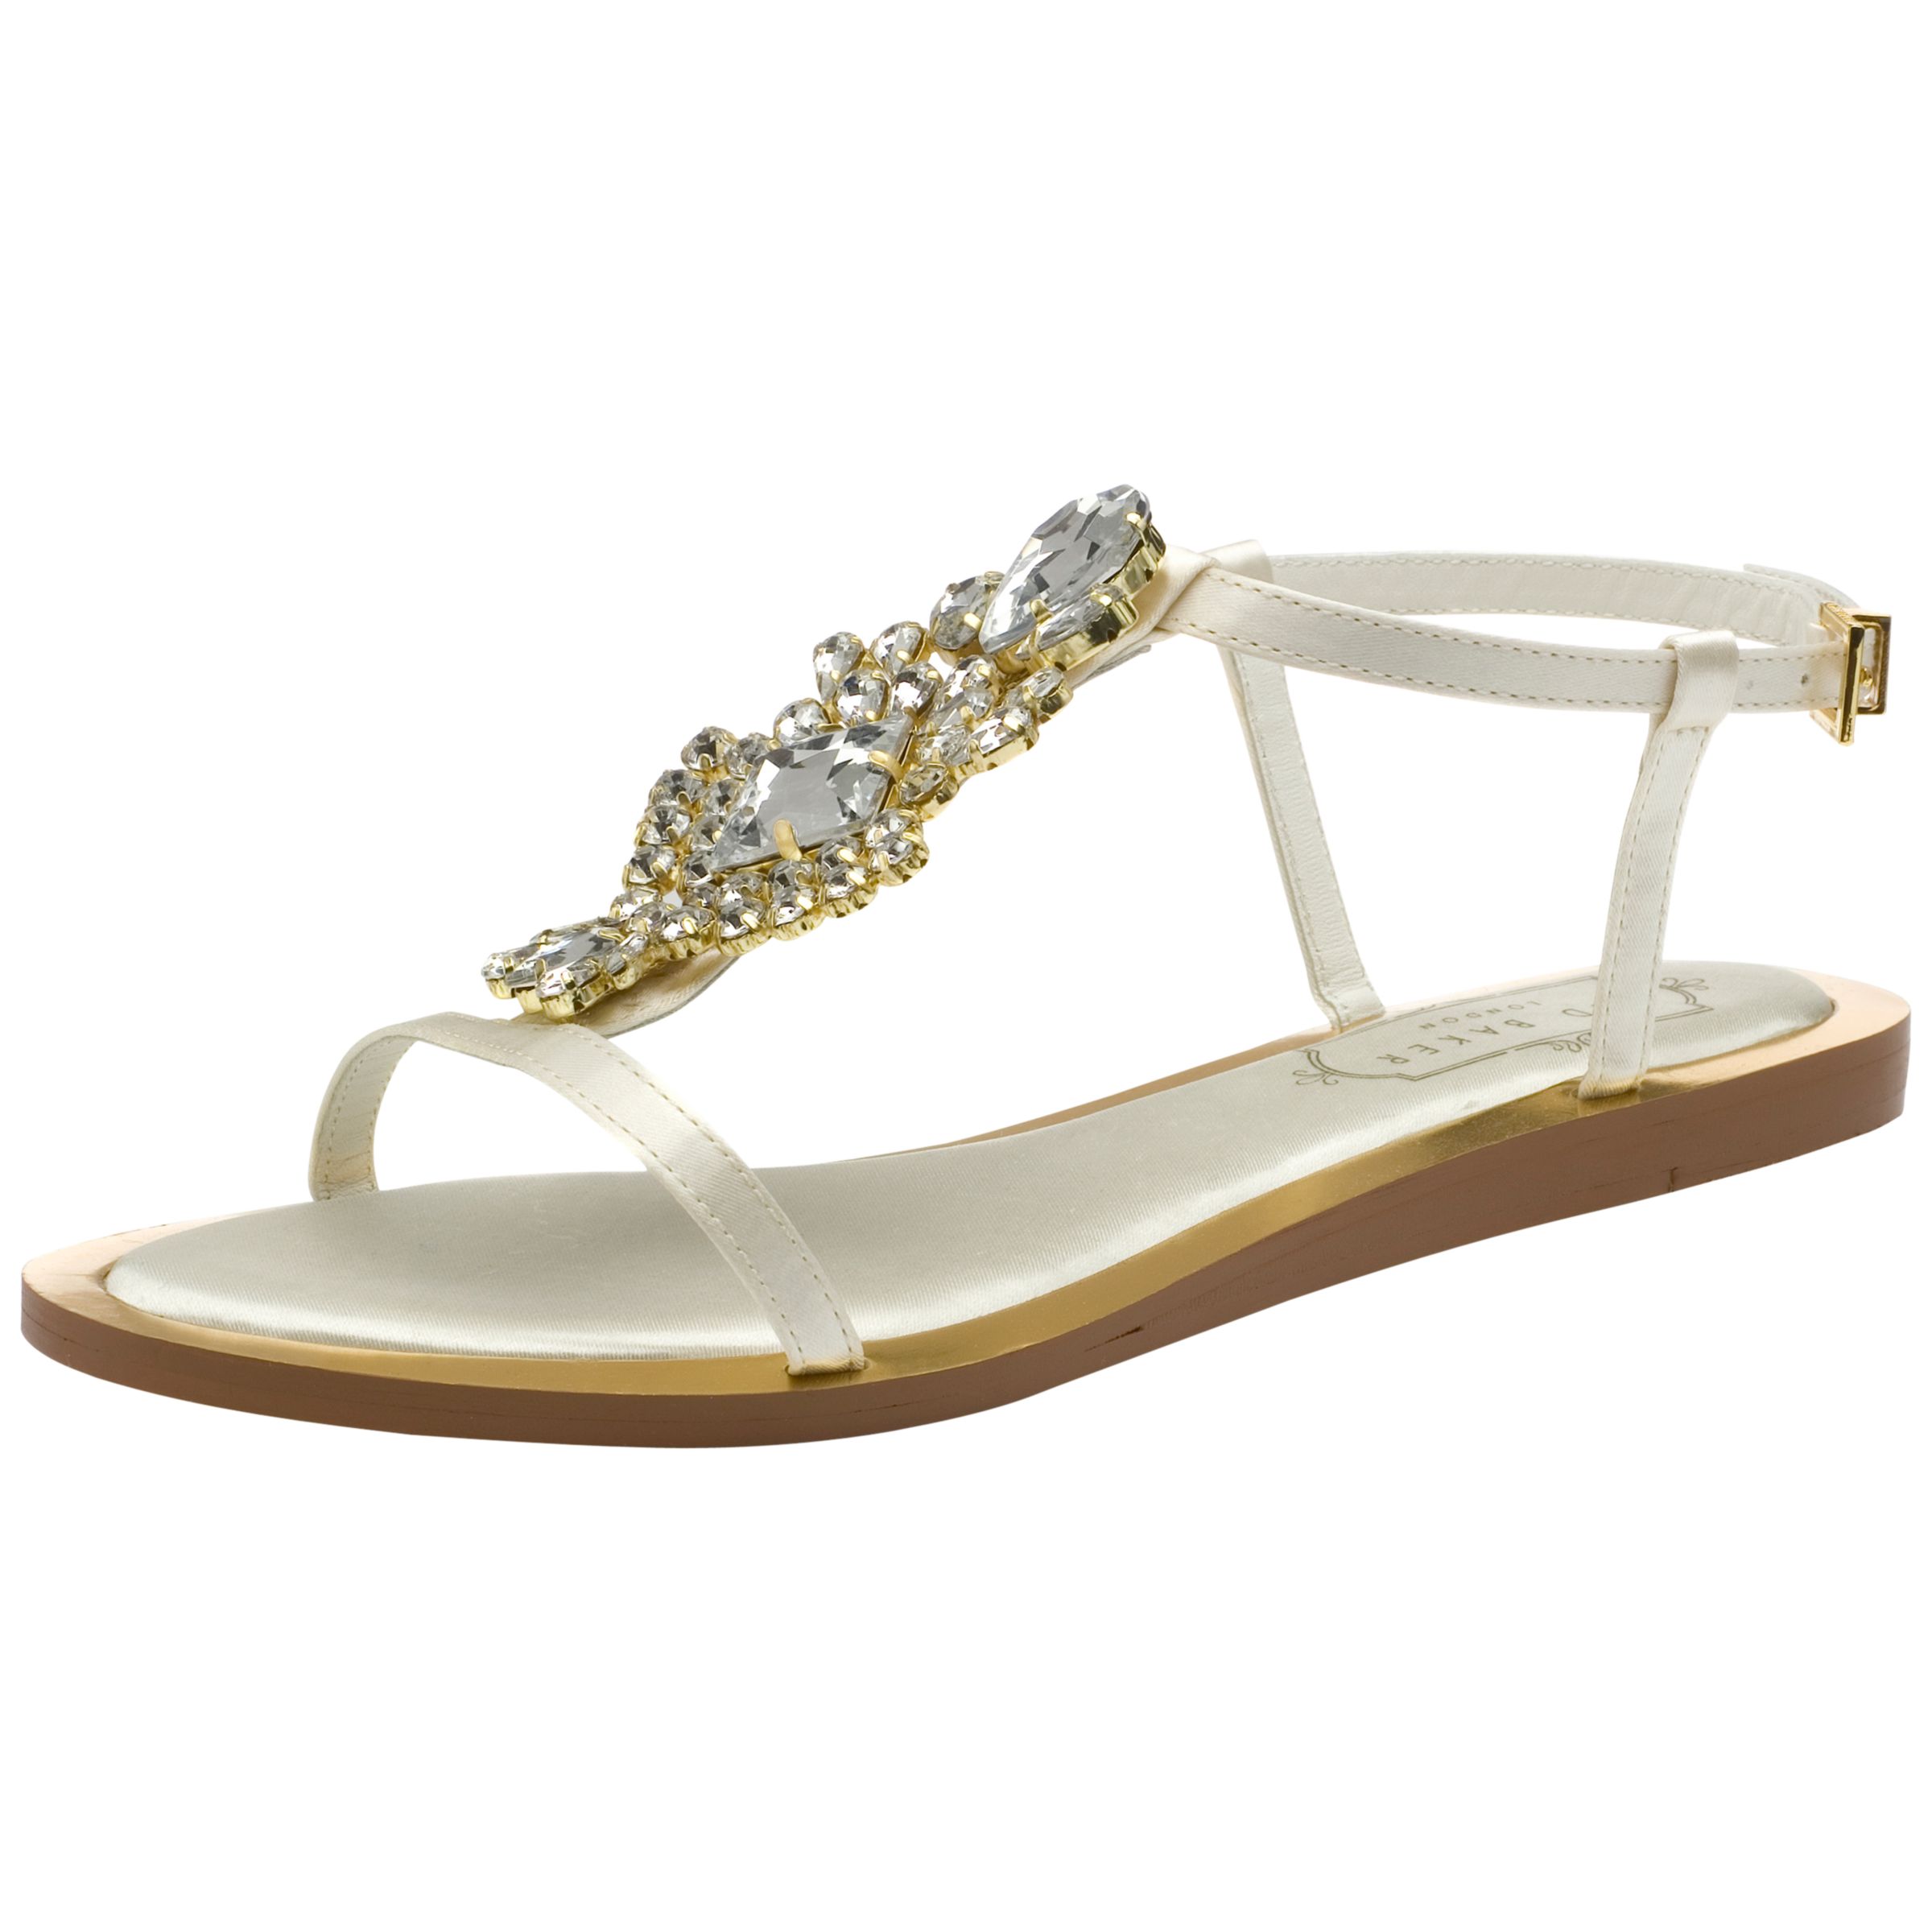 ... Tie the Knot Roseupe Jewelled Sandals, Cream Online at johnlewis